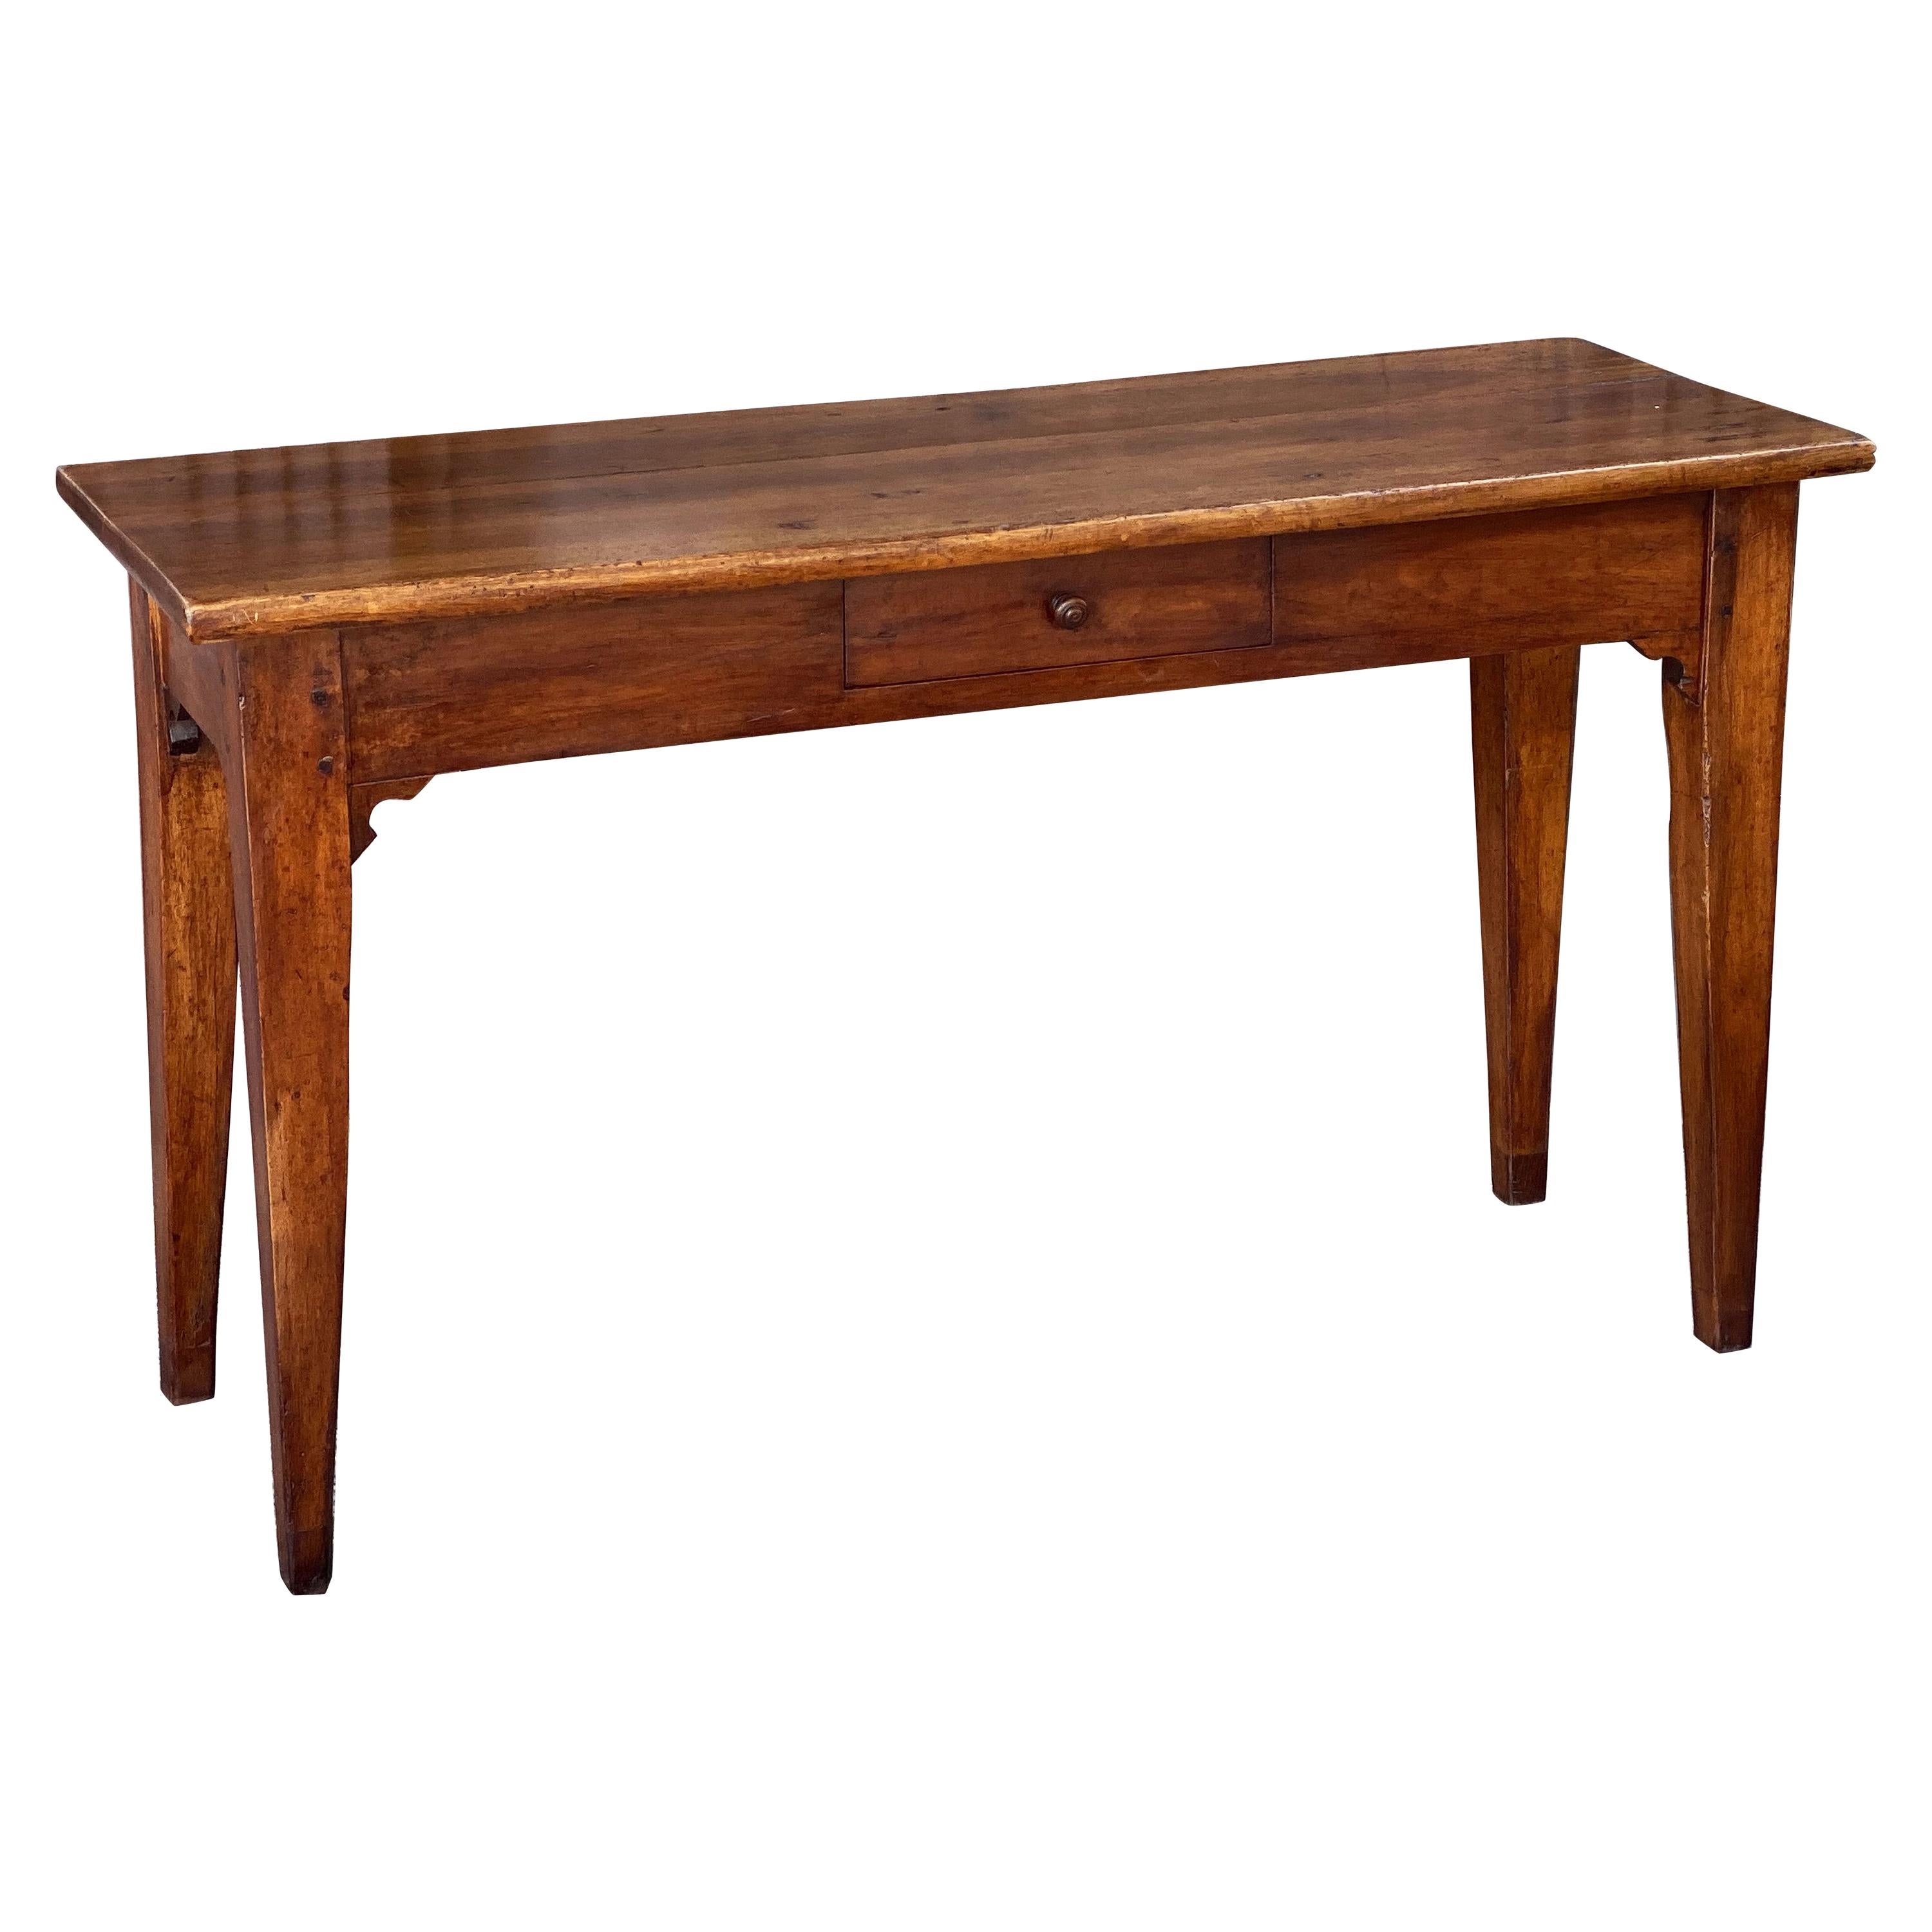 French Console Table or Sideboard of Cherry